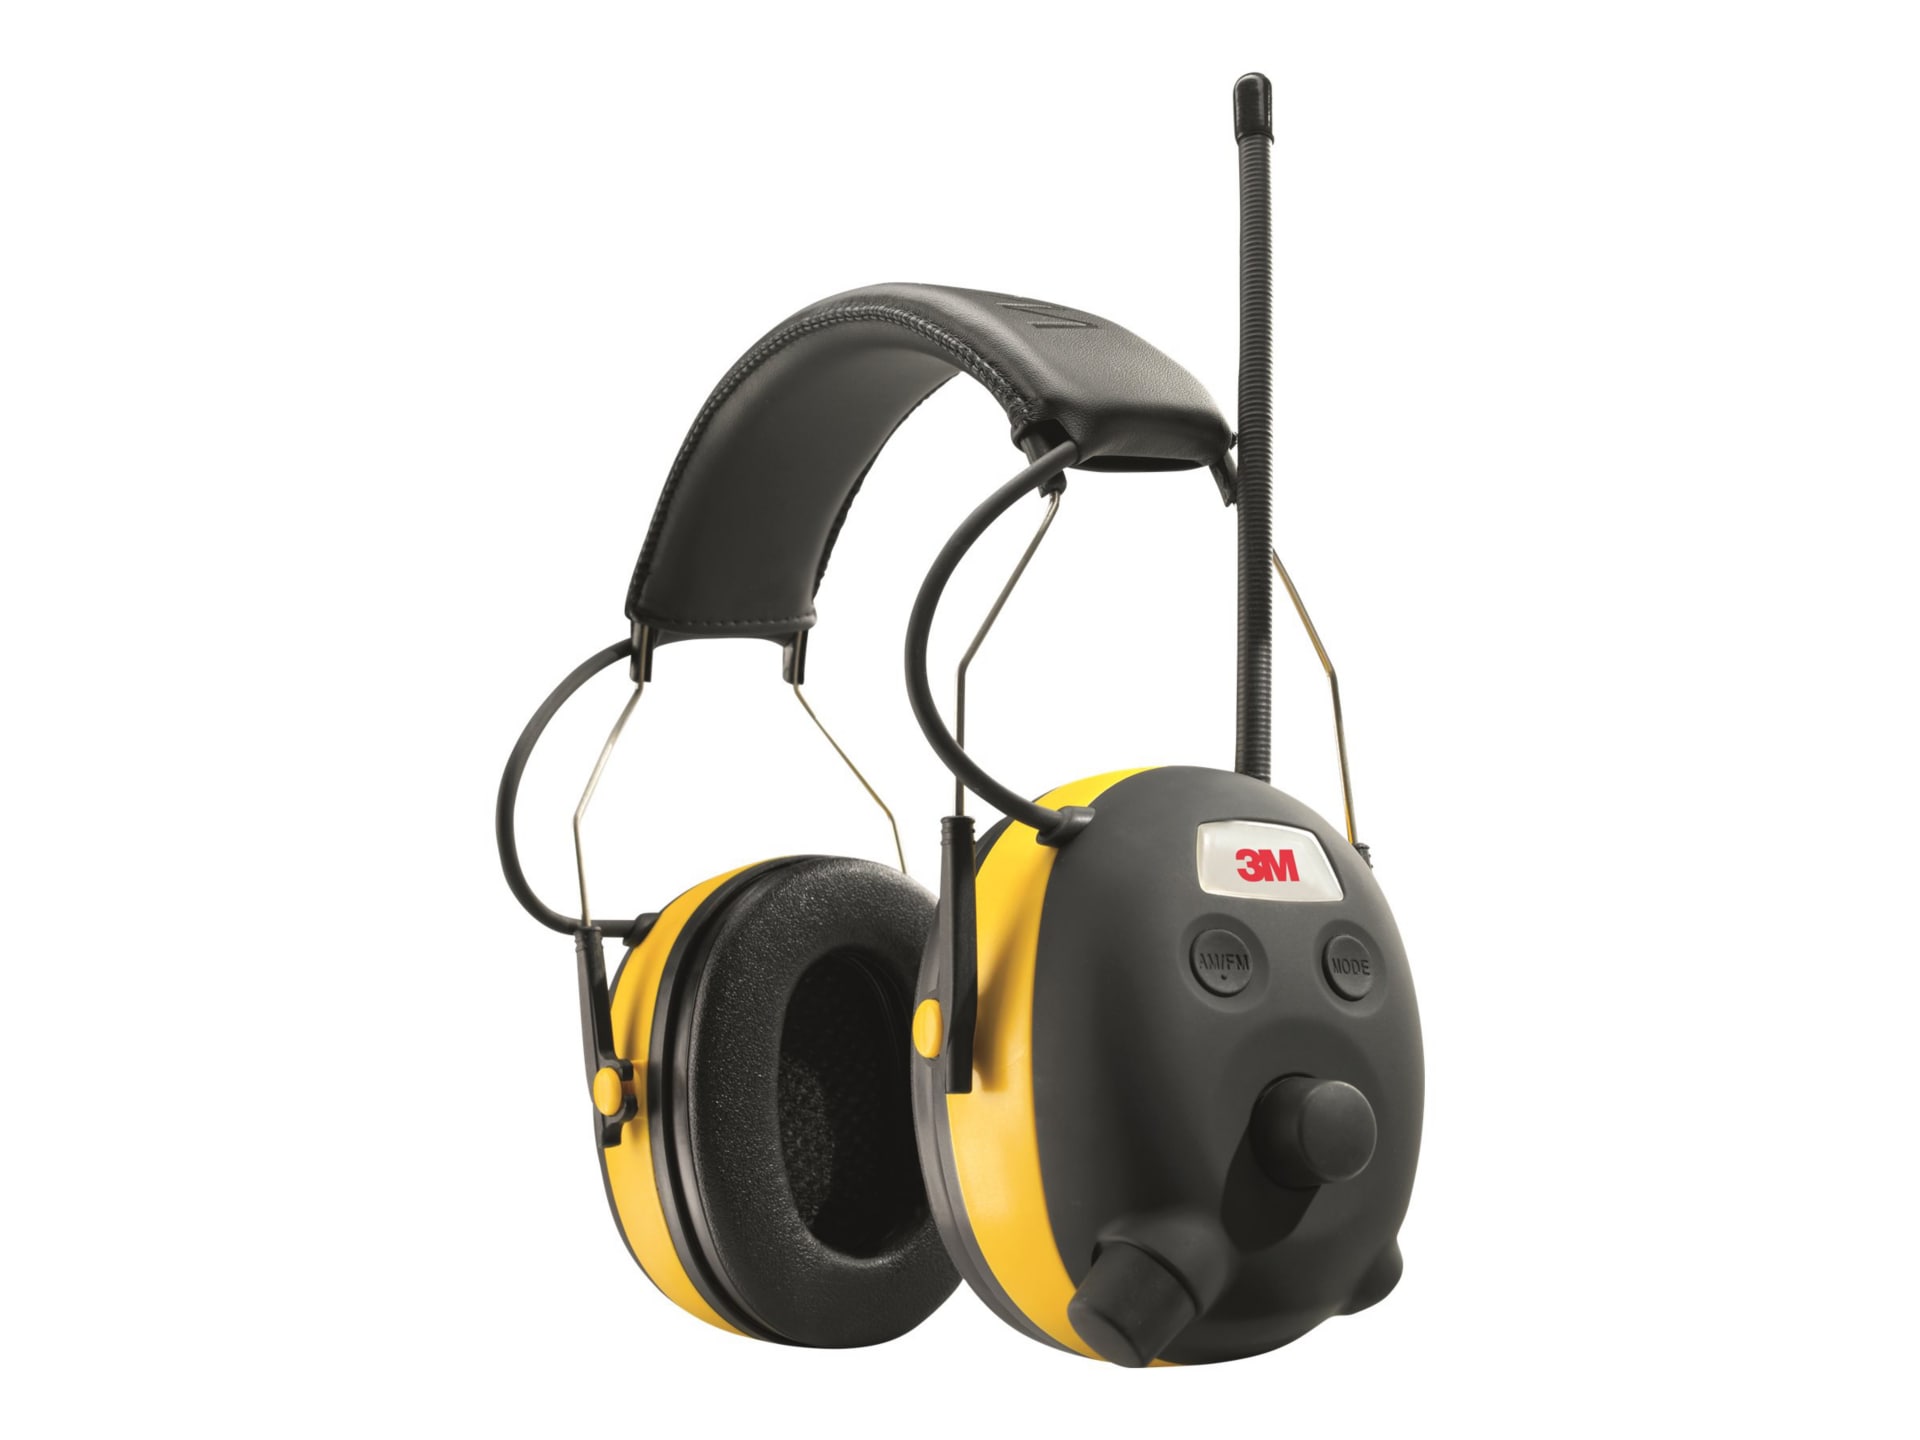 3M WorkTunes Connect Wireless Hearing Protector - headset with radio